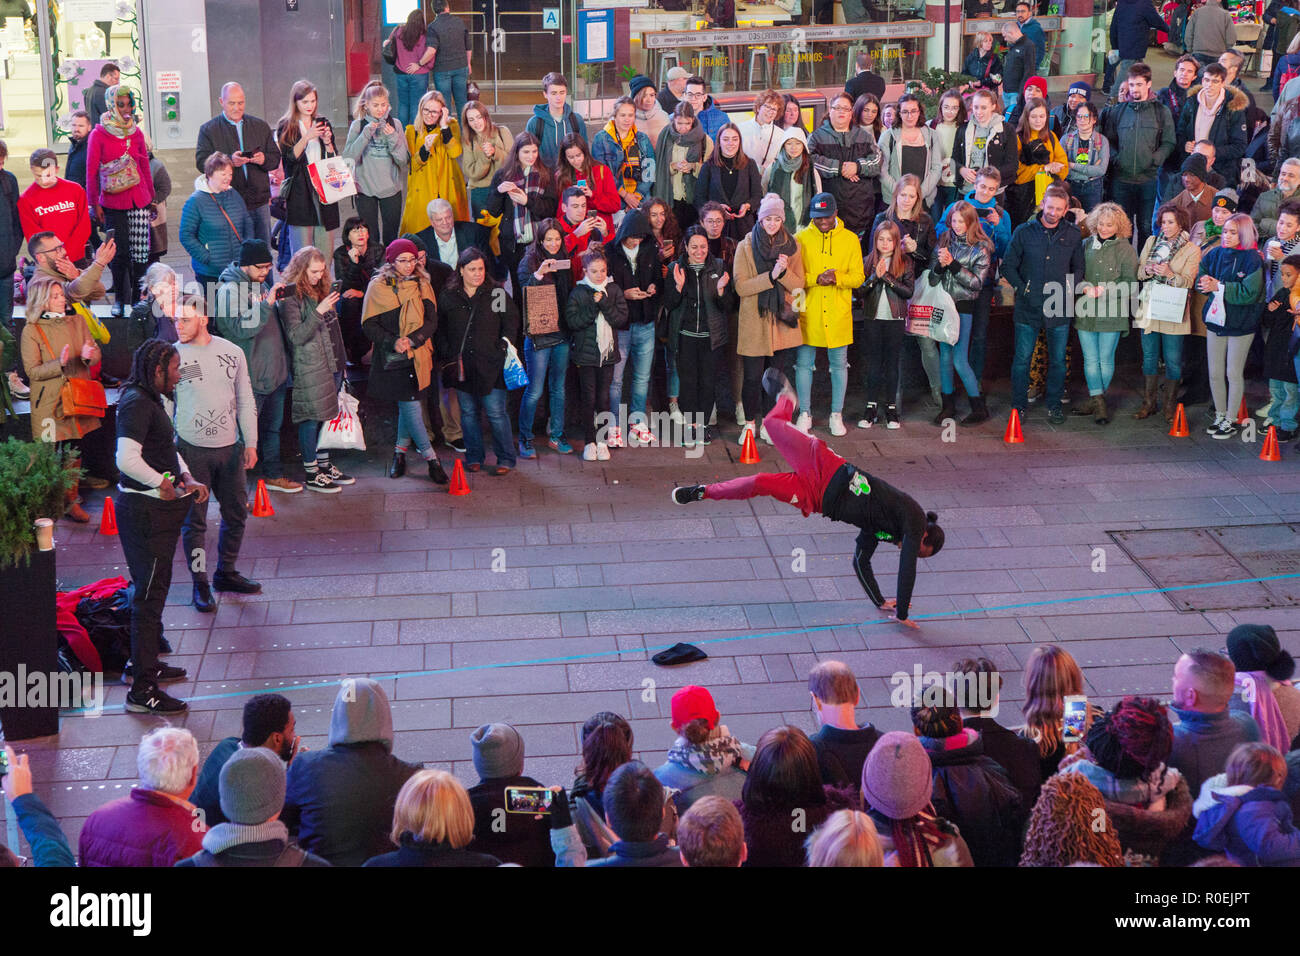 Break dancers at Time Square, New York City, United States of America. Stock Photo